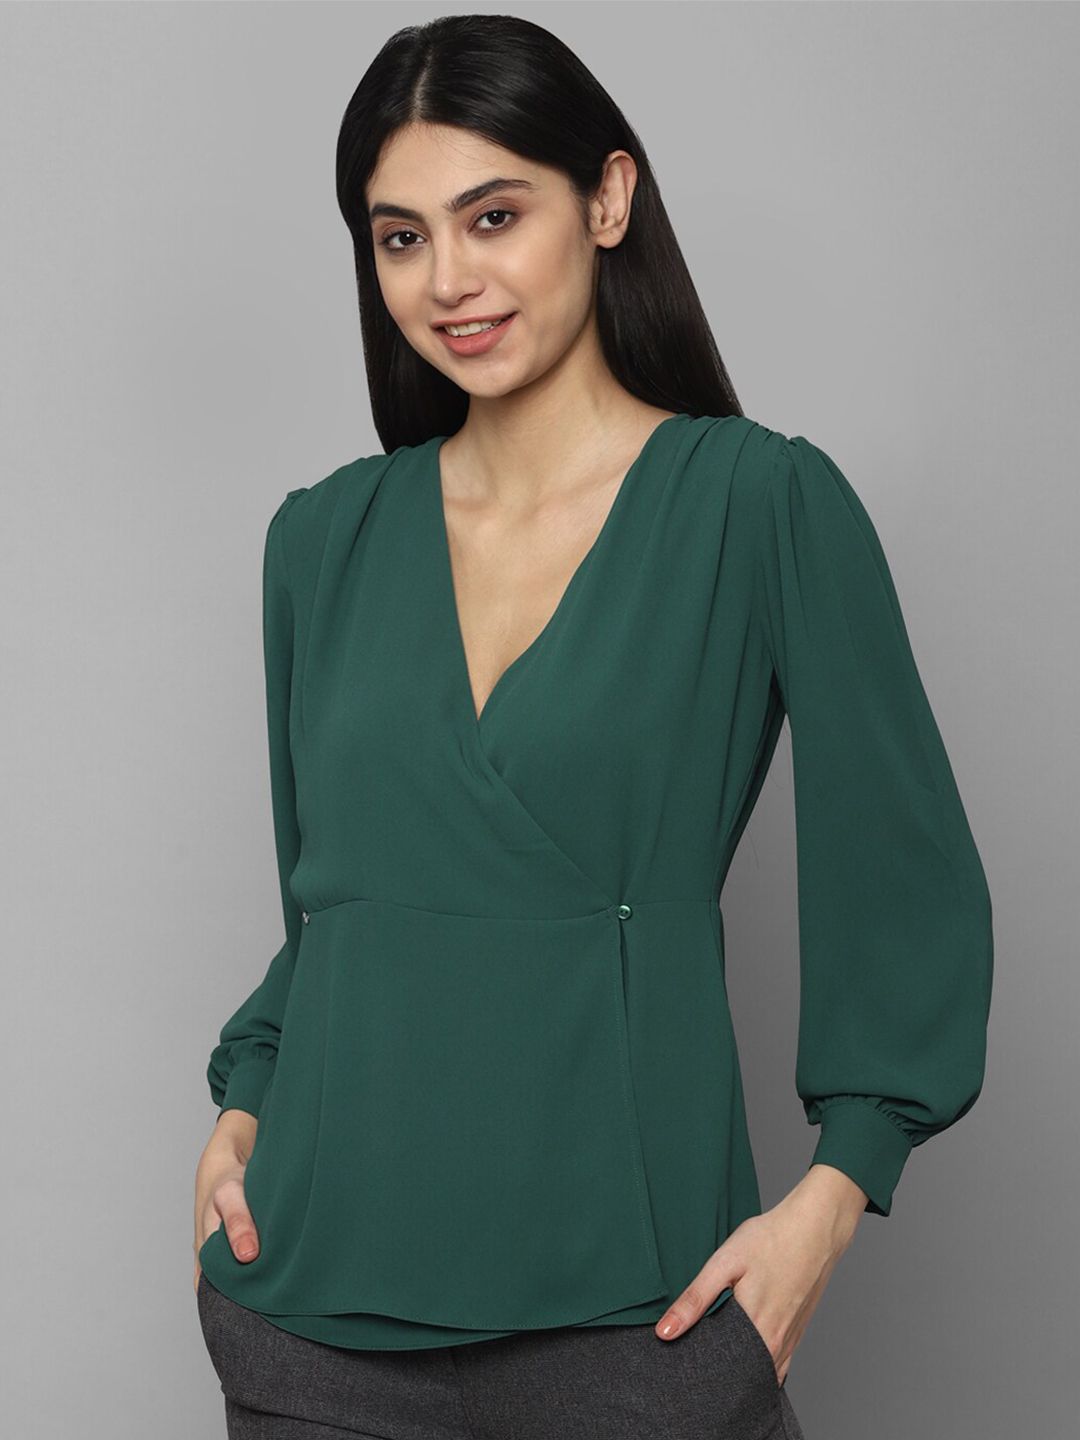 Allen Solly Woman Green Layered Wrap Top Price in India